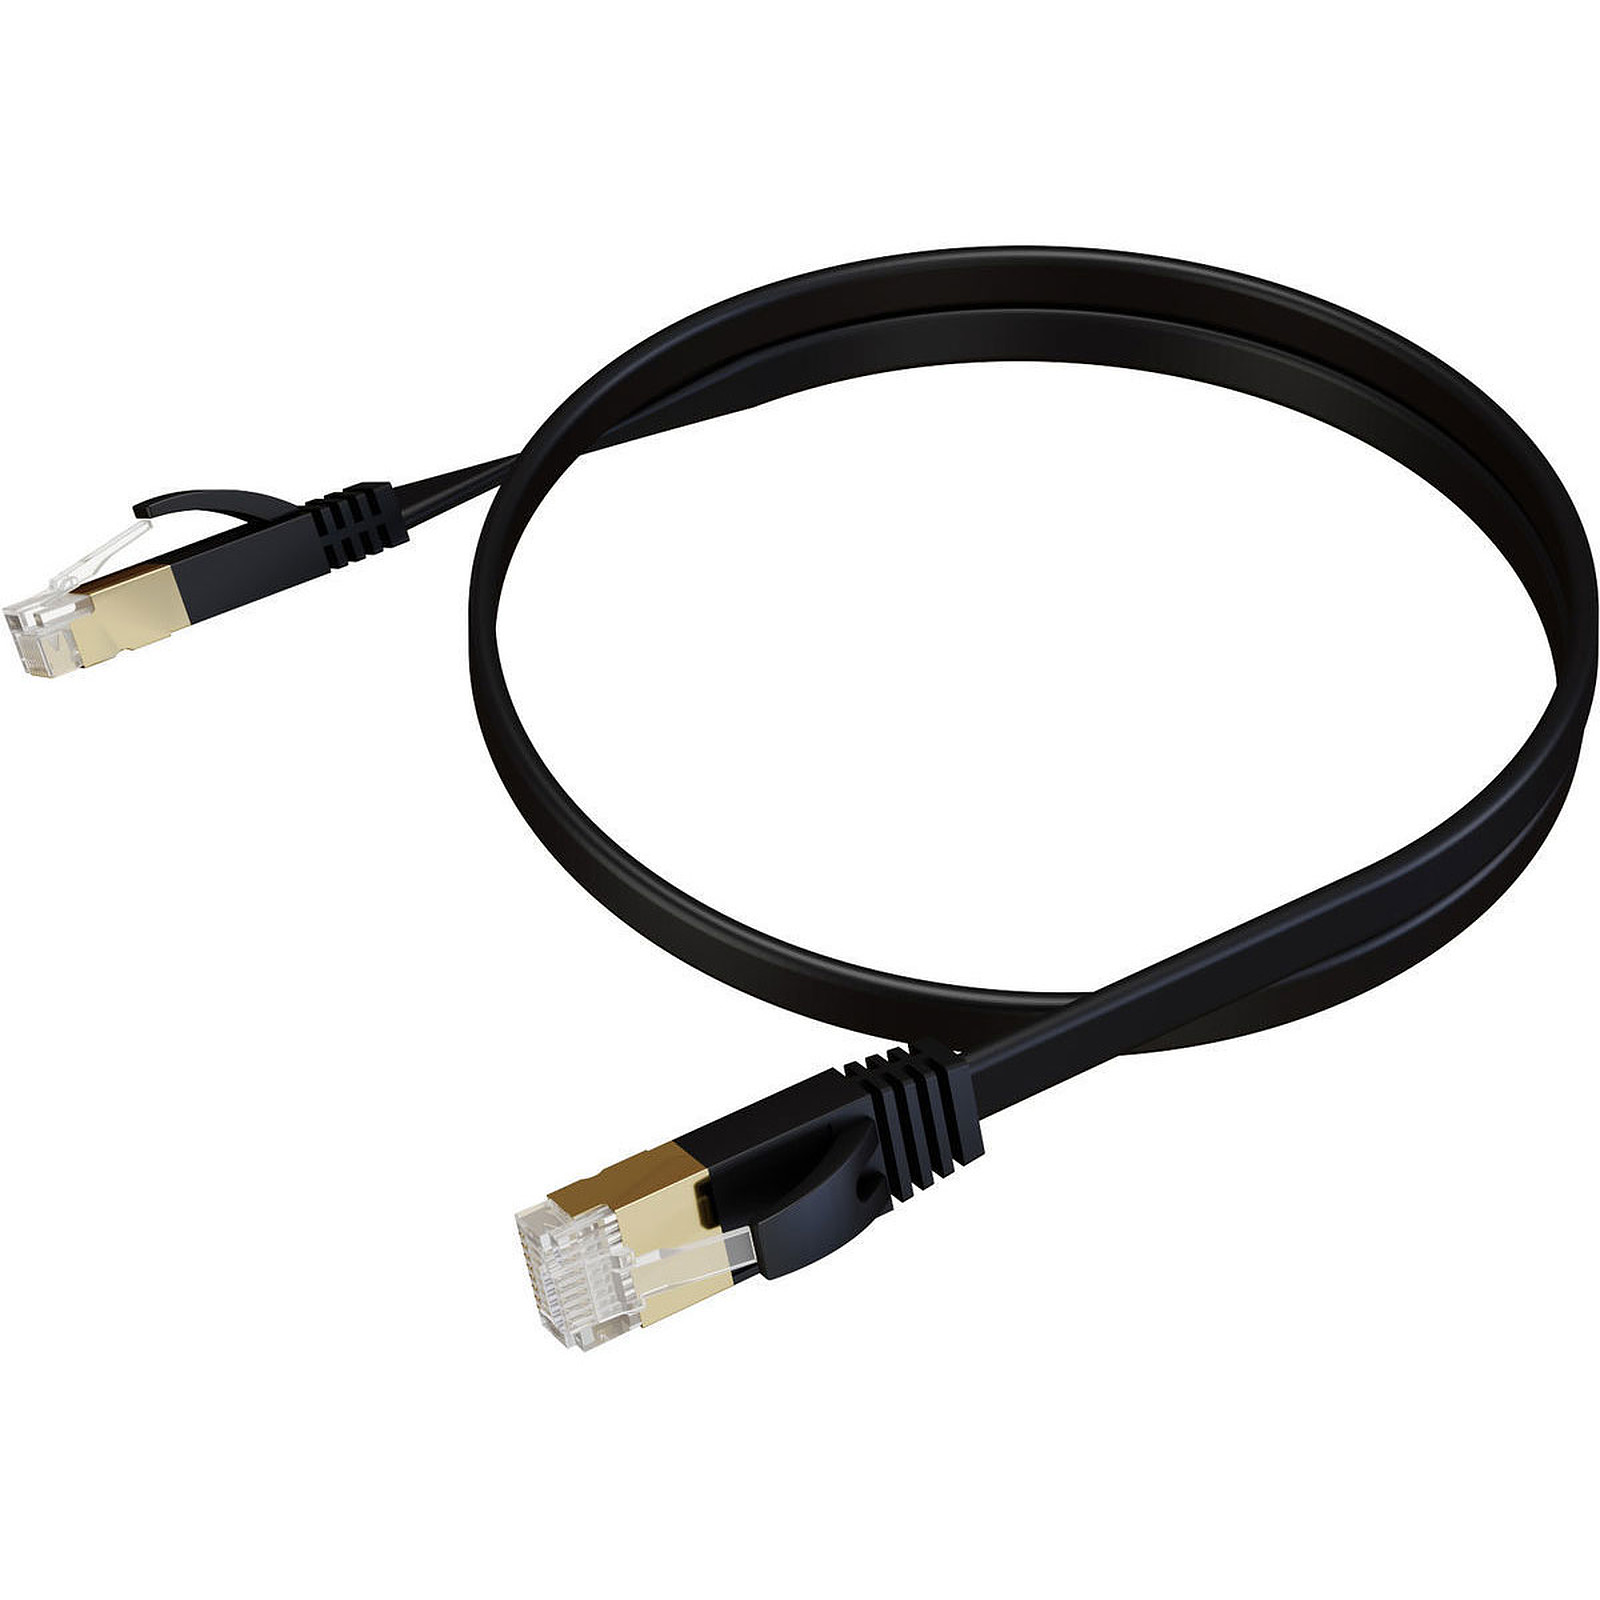 Real Cable E-NET 600-2 (15 m) - Cable RJ45 Real Cable